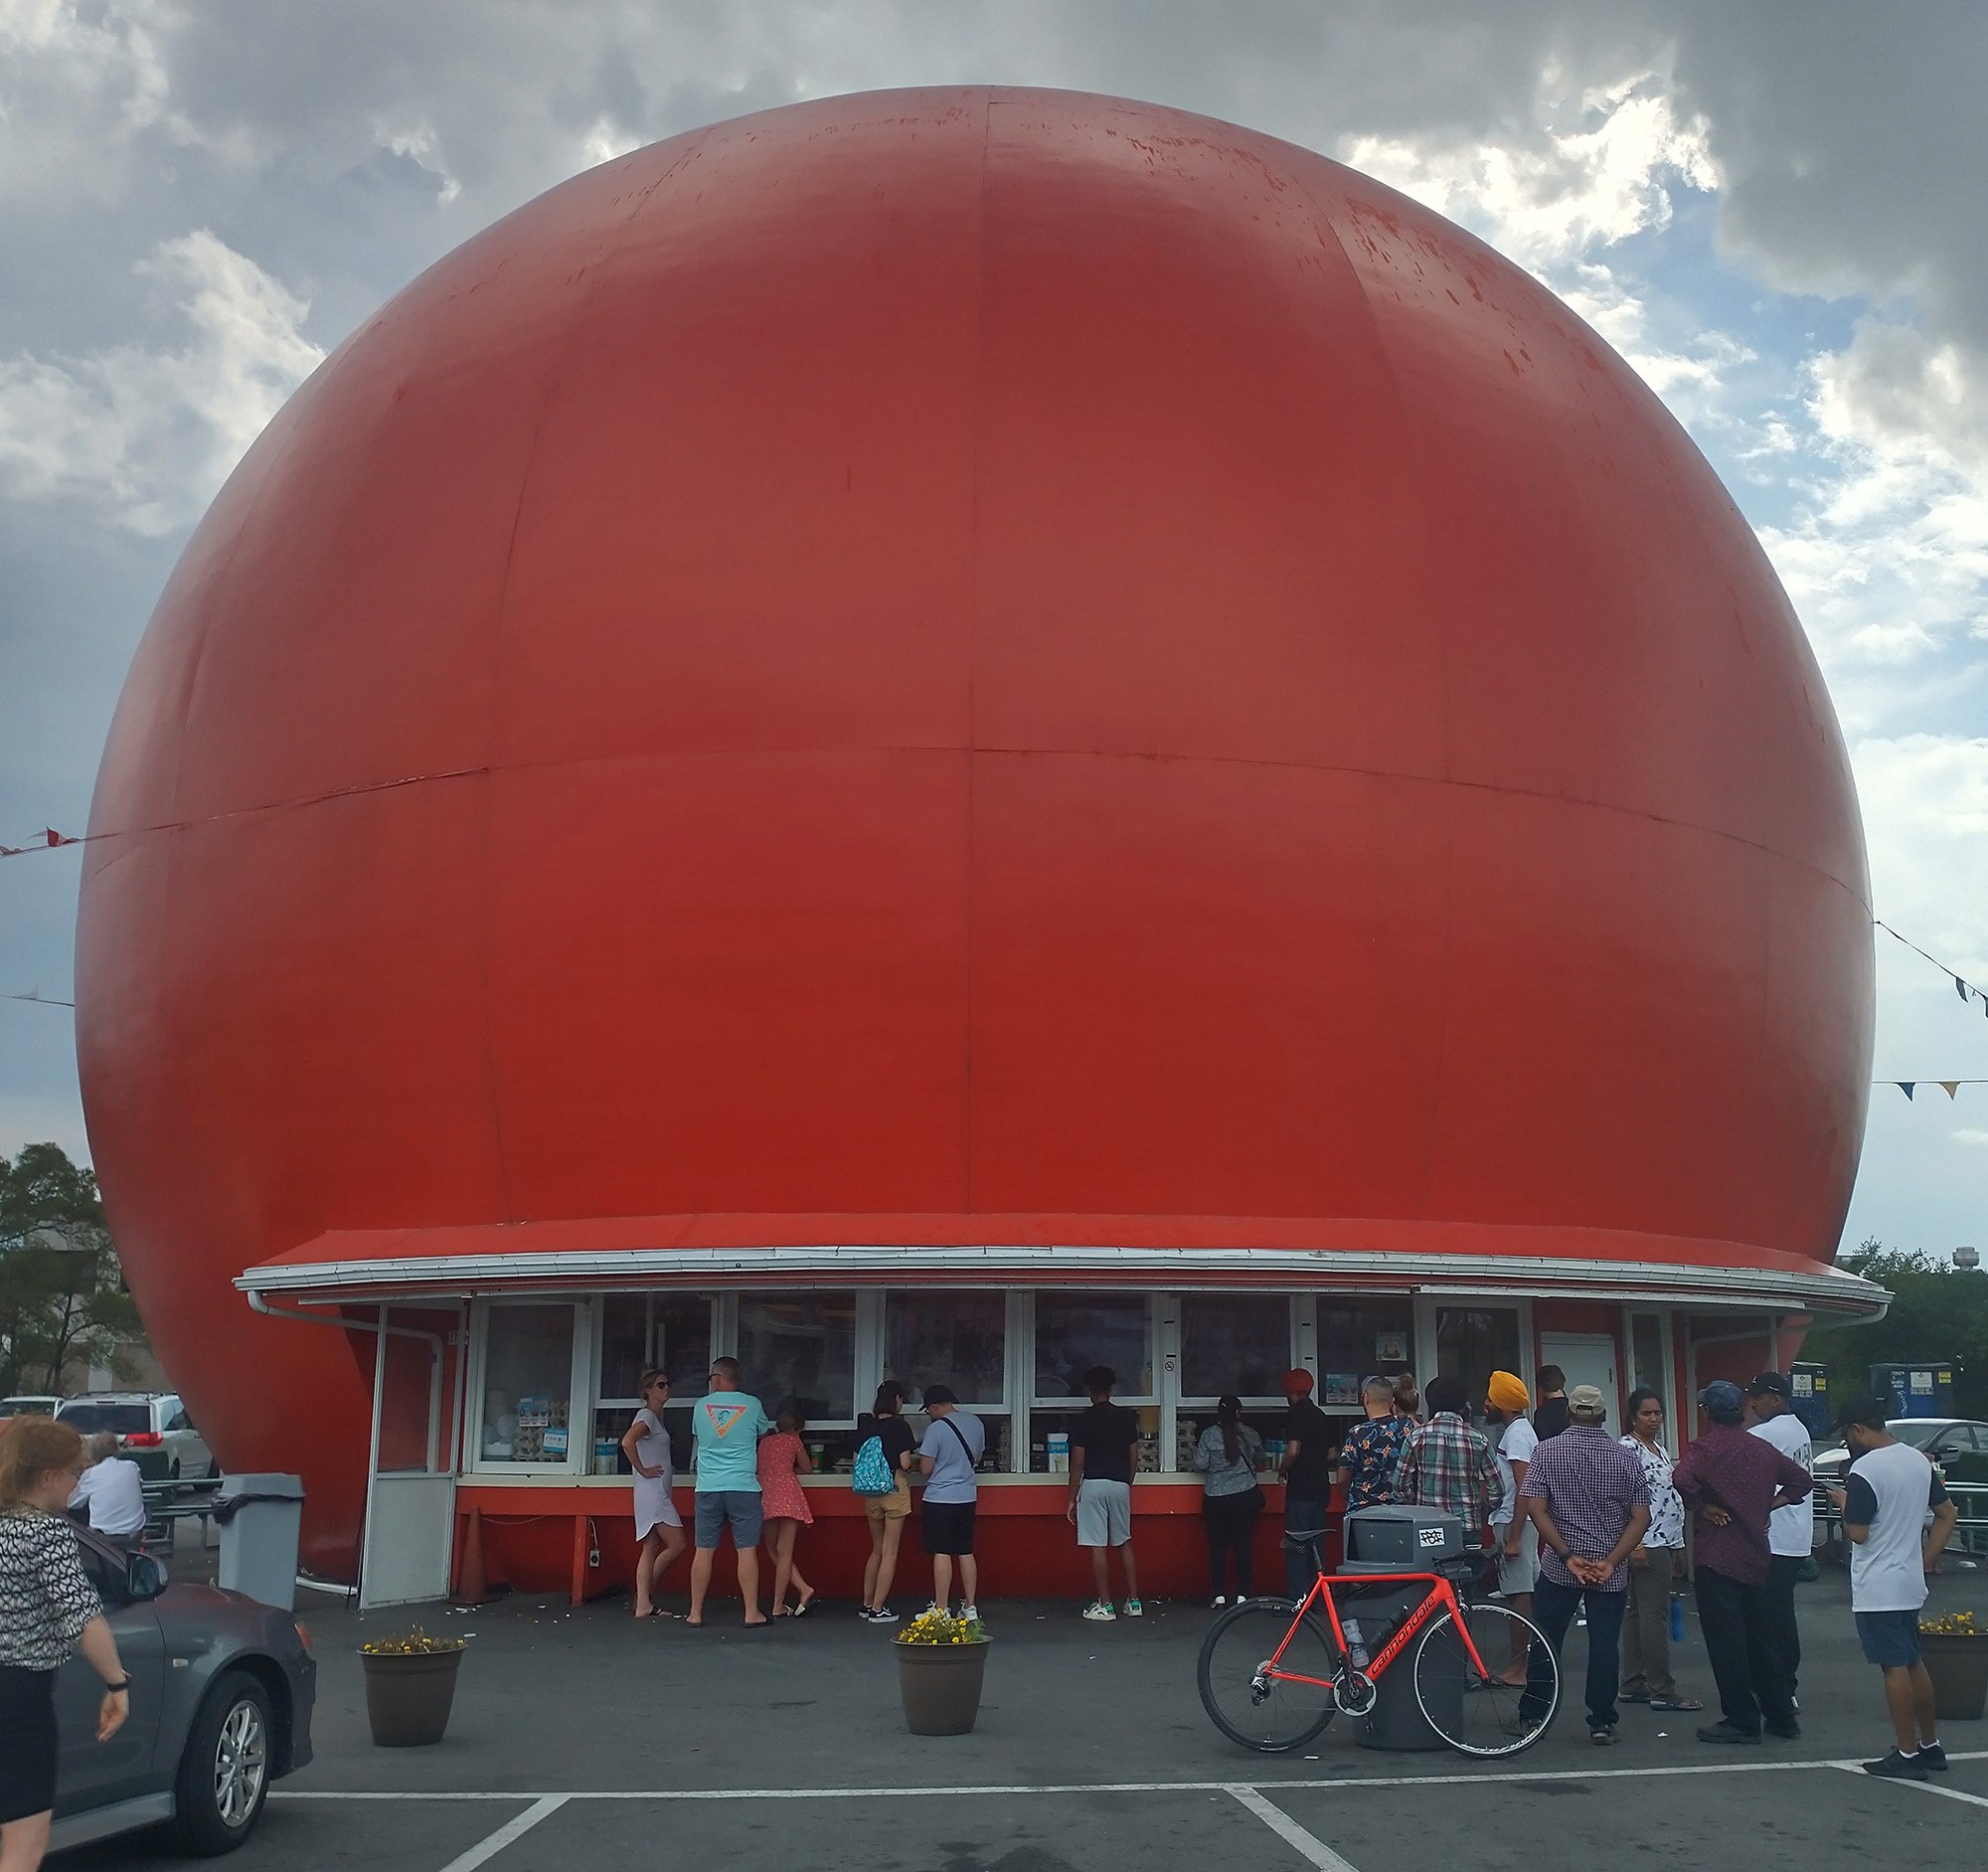 Montreal is also home to the biggest orange. Sort of. It's some sort of fast food. Bleh